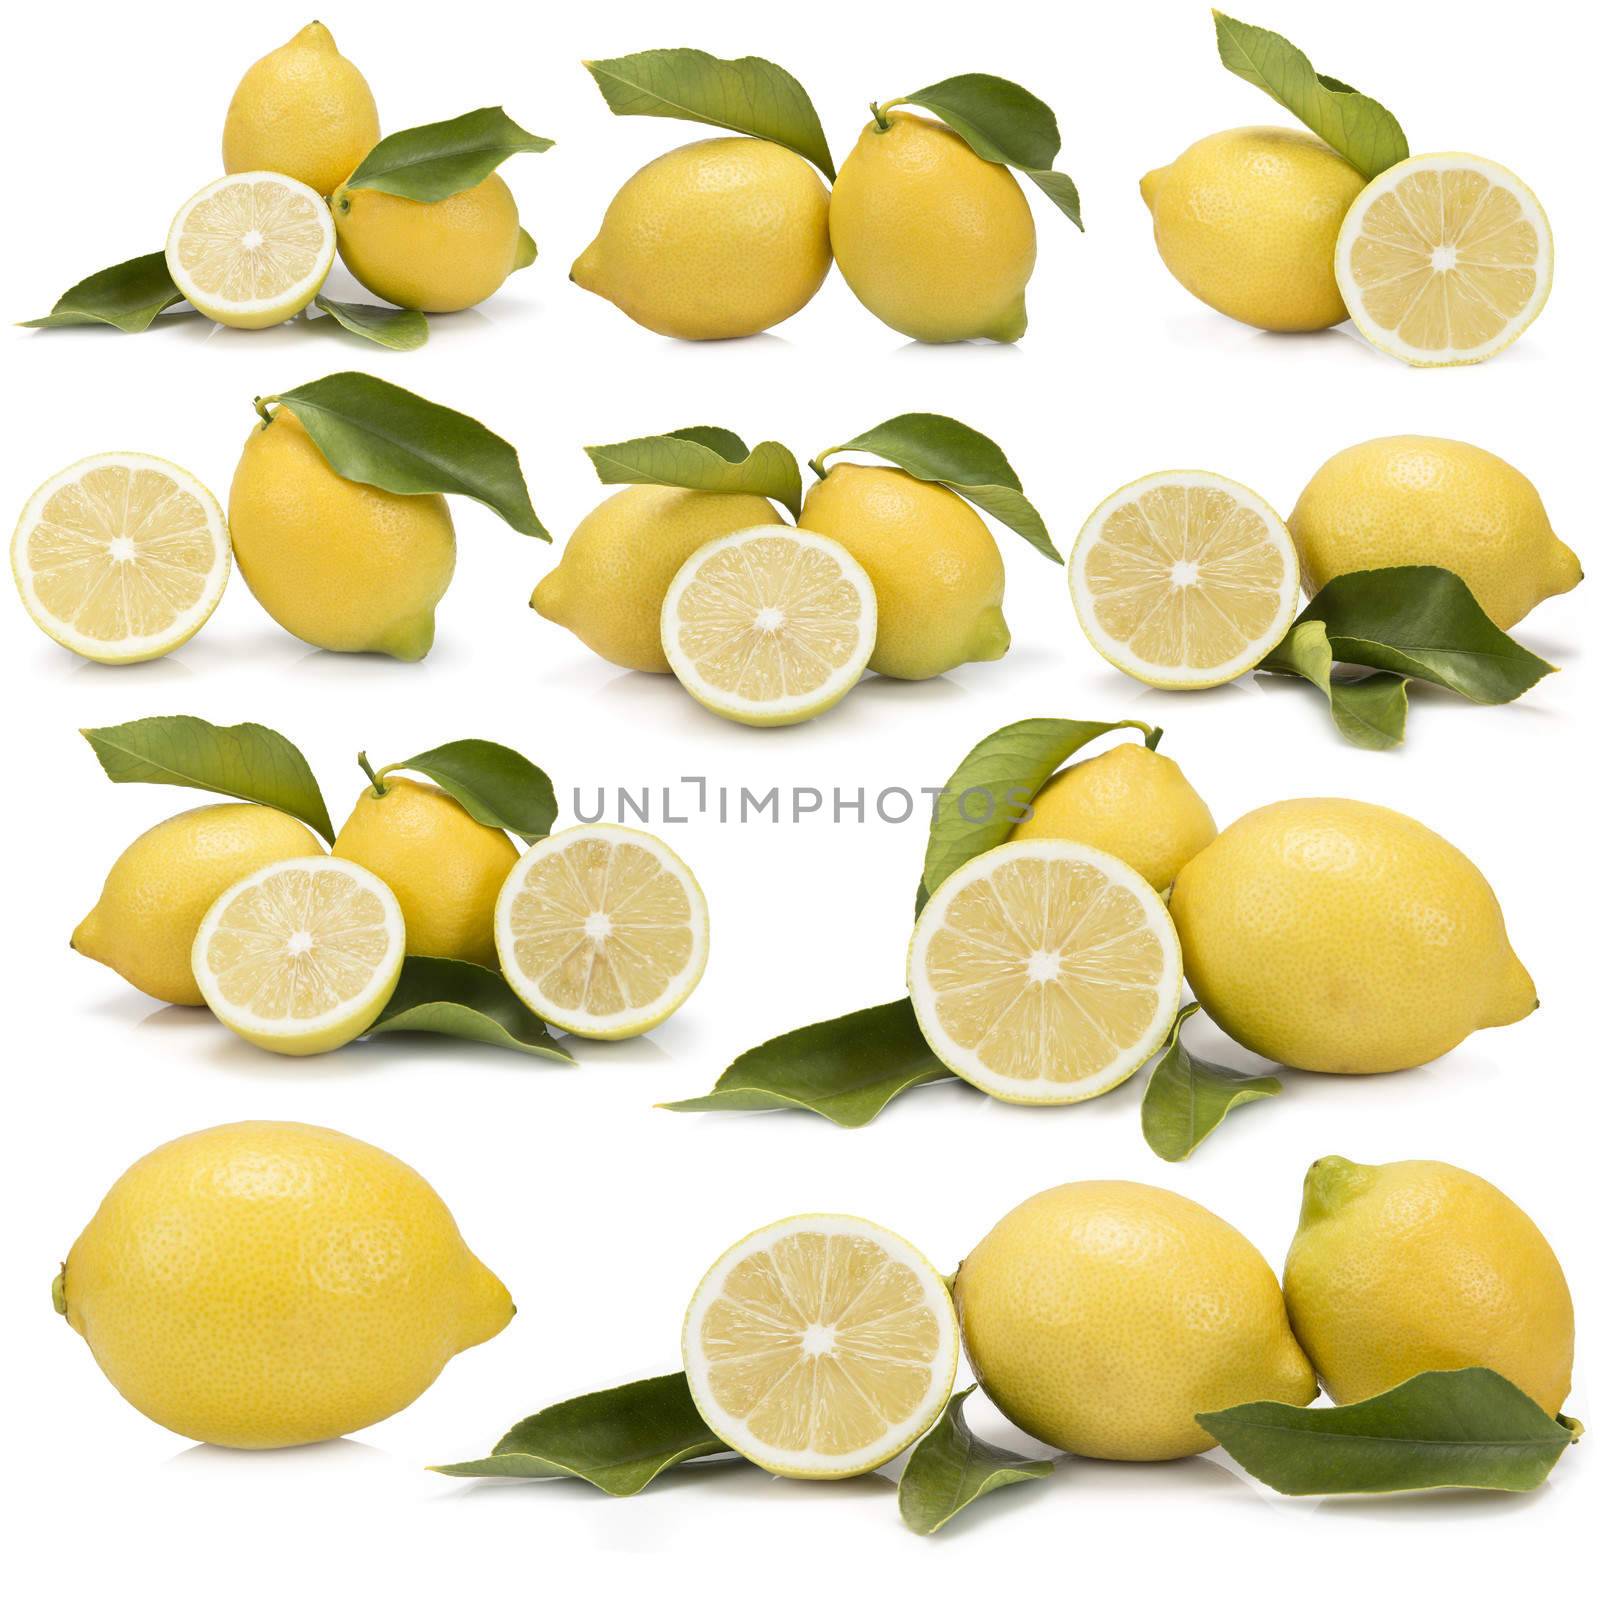 Great set of photographs of lemons by angelsimon